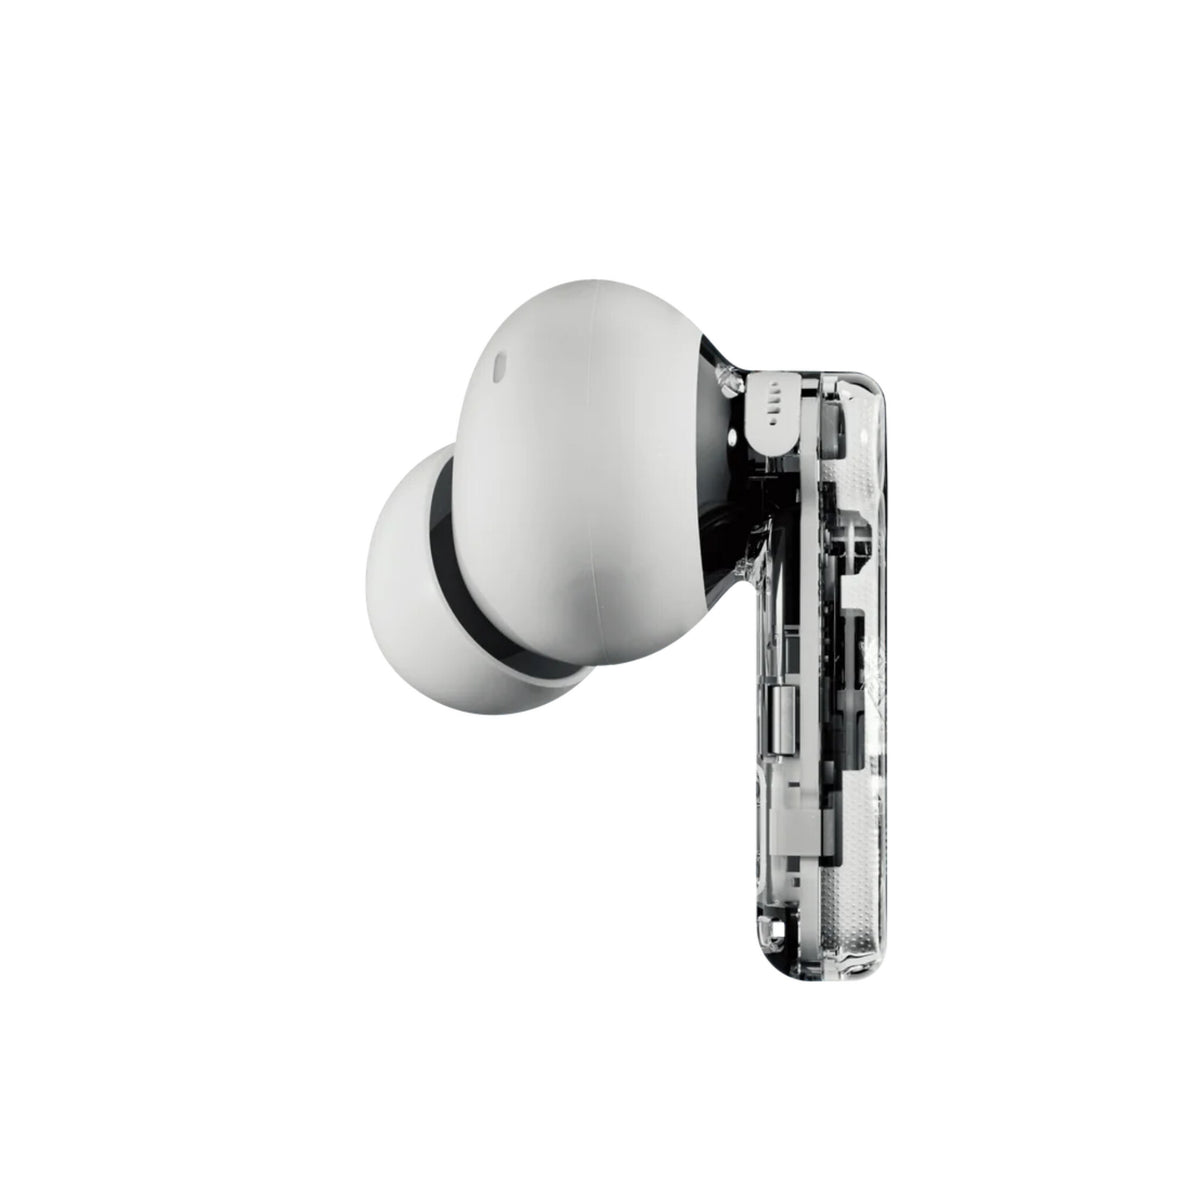 Nothing Ear (a) - True Wireless Stereo (TWS) In-ear Bluetooth Earbuds in Transparent / White